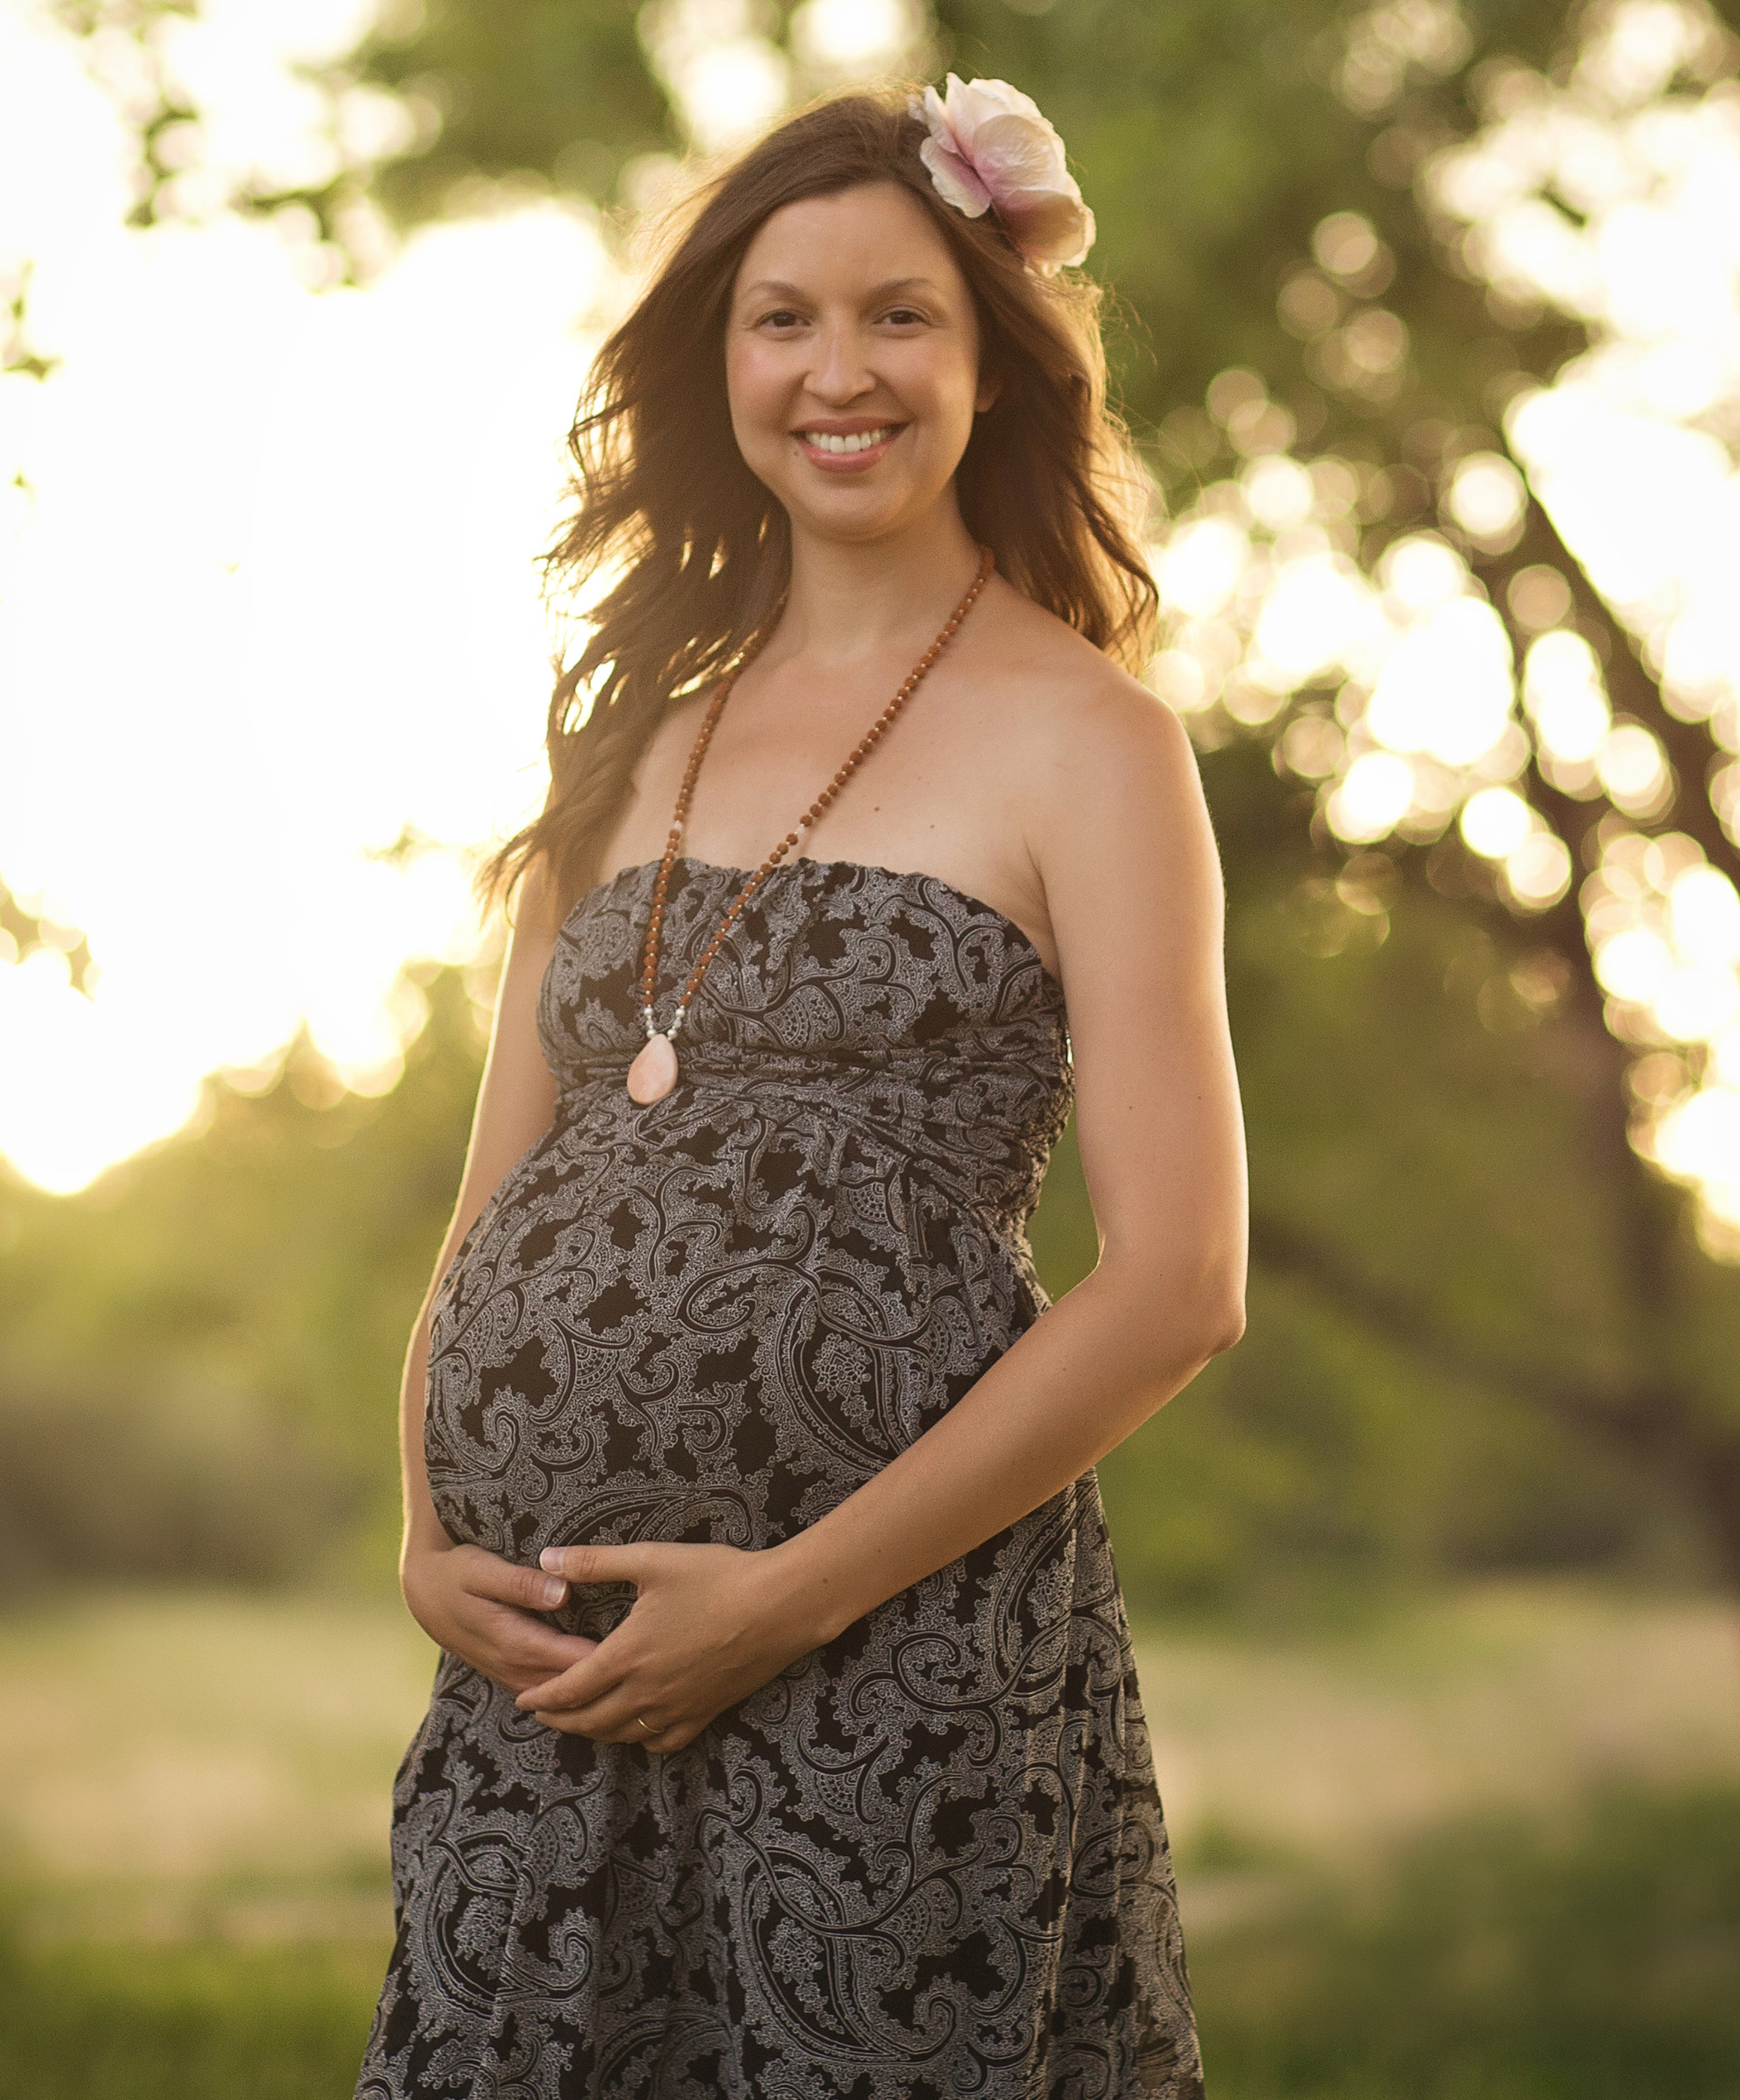 Pregnant Woman - Josie Bouchier | Holistic Health For The Whole Woman